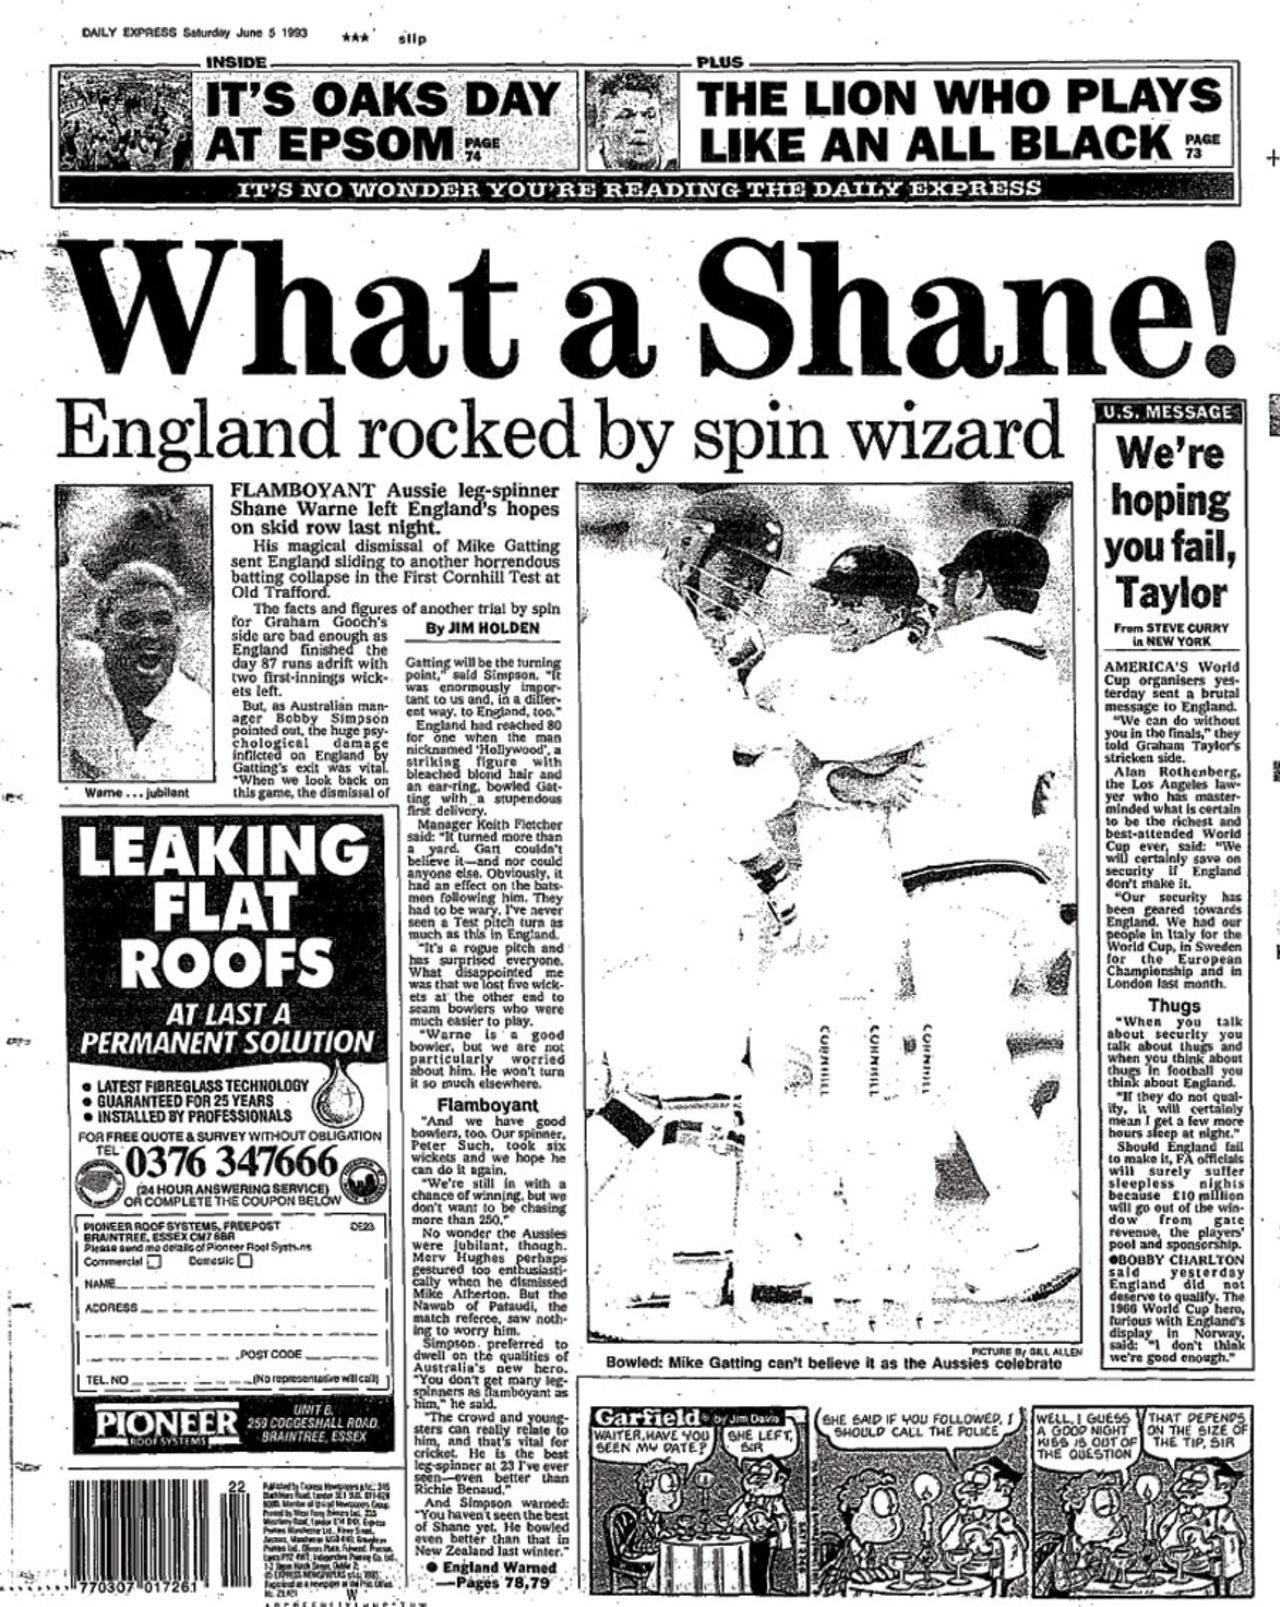 The newspapers the day Shane Warne's Ashes debut, England v Australia, 1st Test, Old Trafford, June 4, 1993